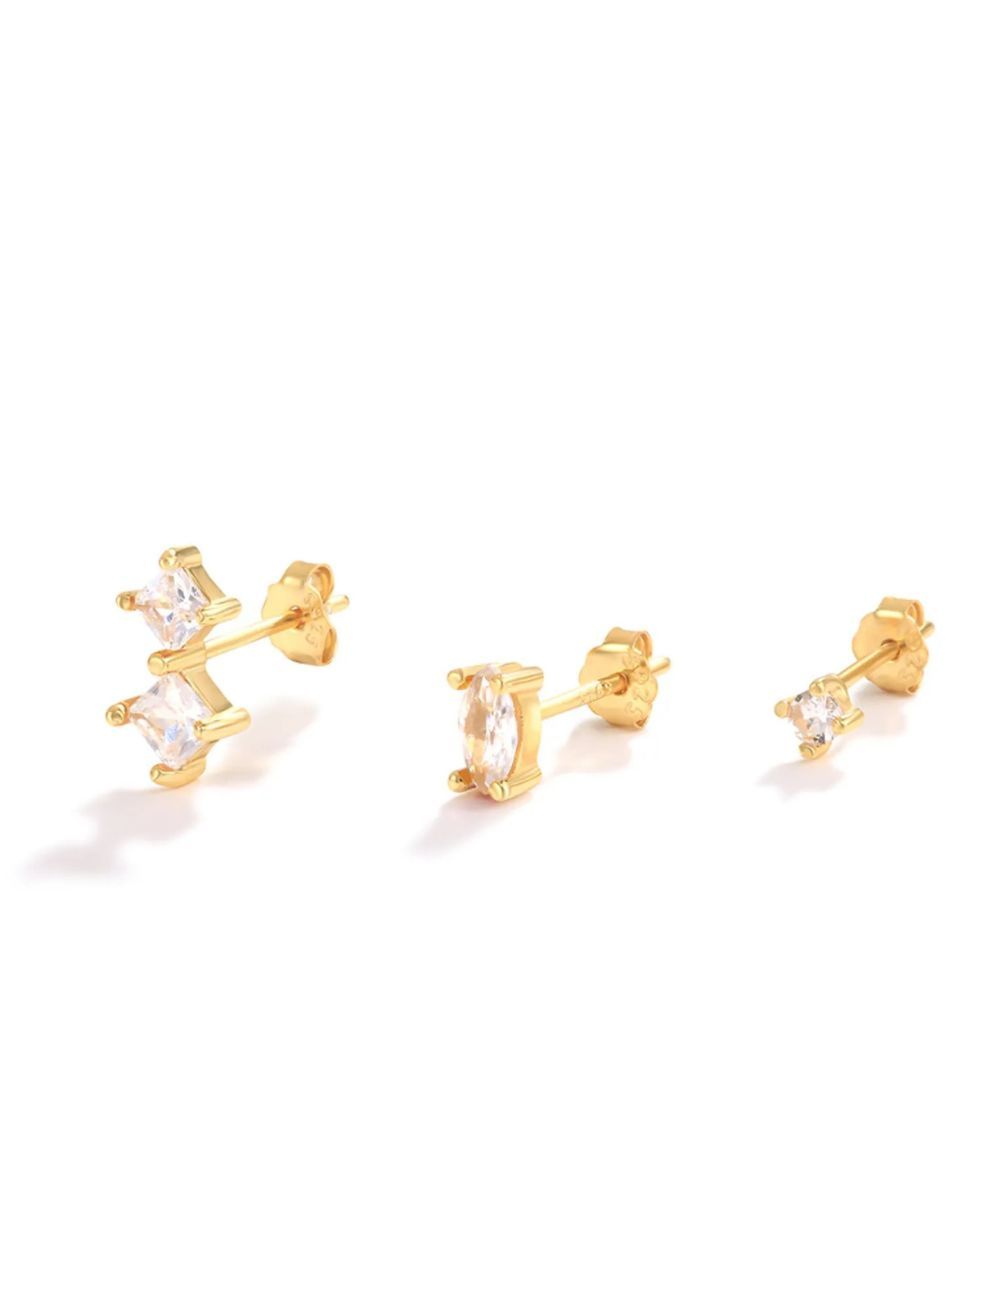 Earrings set - gold plated